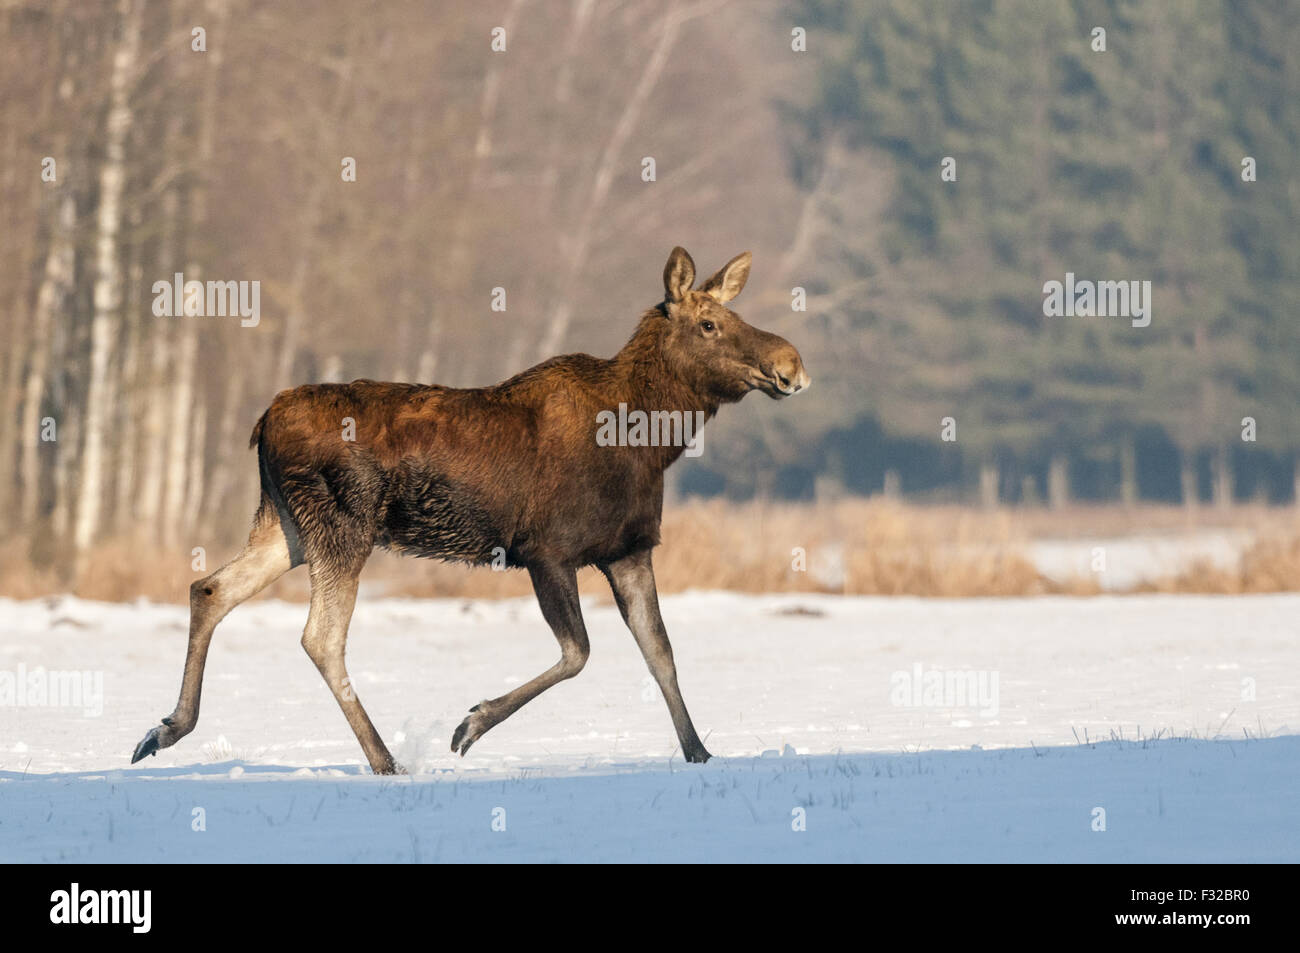 European Moose (Alces alces alces) adult female, running on snow covered field, Biebrza N.P., Podlaskie Voivodeship, Poland, February Stock Photo